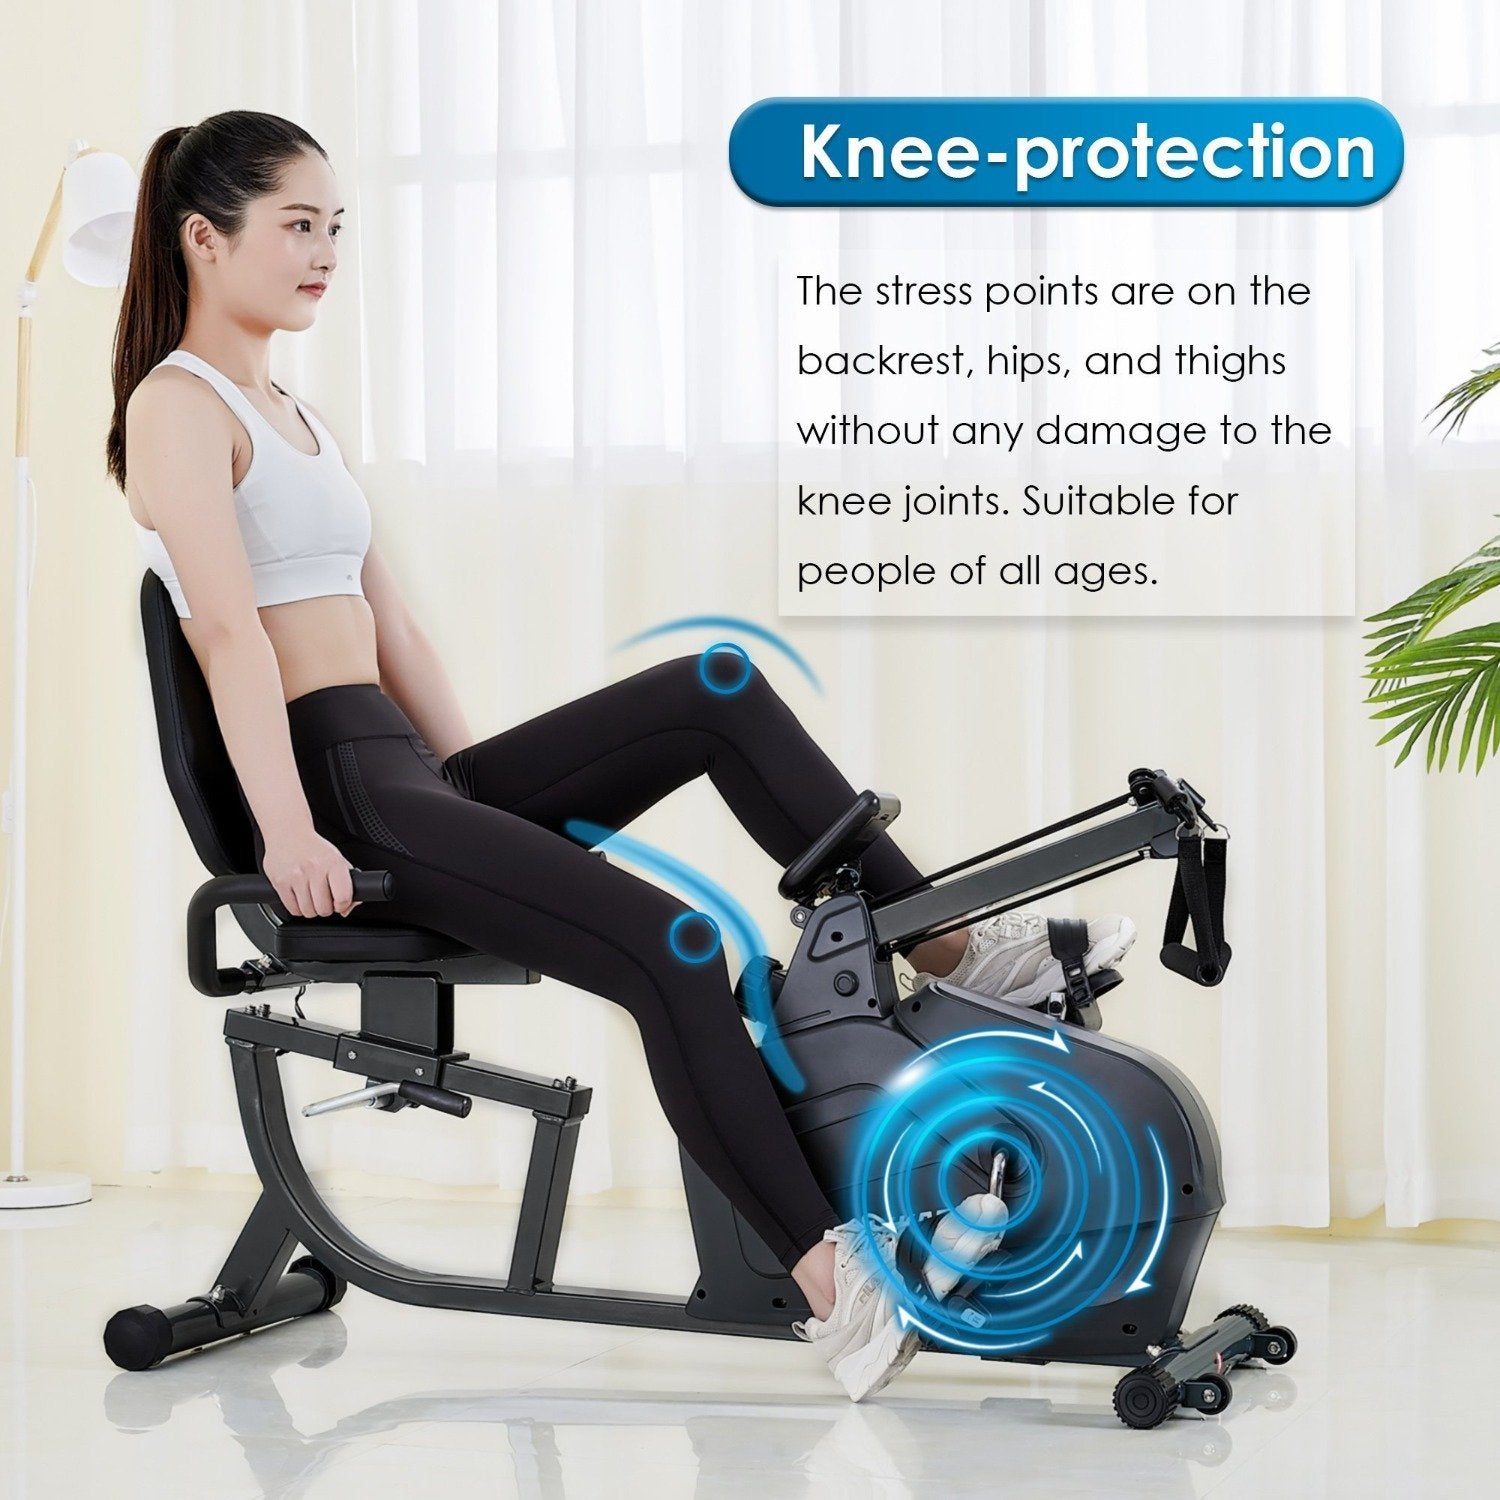 Load image into Gallery viewer, MaxKare Recumbent Exercise Bike Stationary Magnetic Indoor Cycling Bike with Arm Resistance Bands/Easy Adjustable Seat/LCD Monitor/Pulse Rate Monitoring for All Ages Cardio Workout at Home - NAIPO
